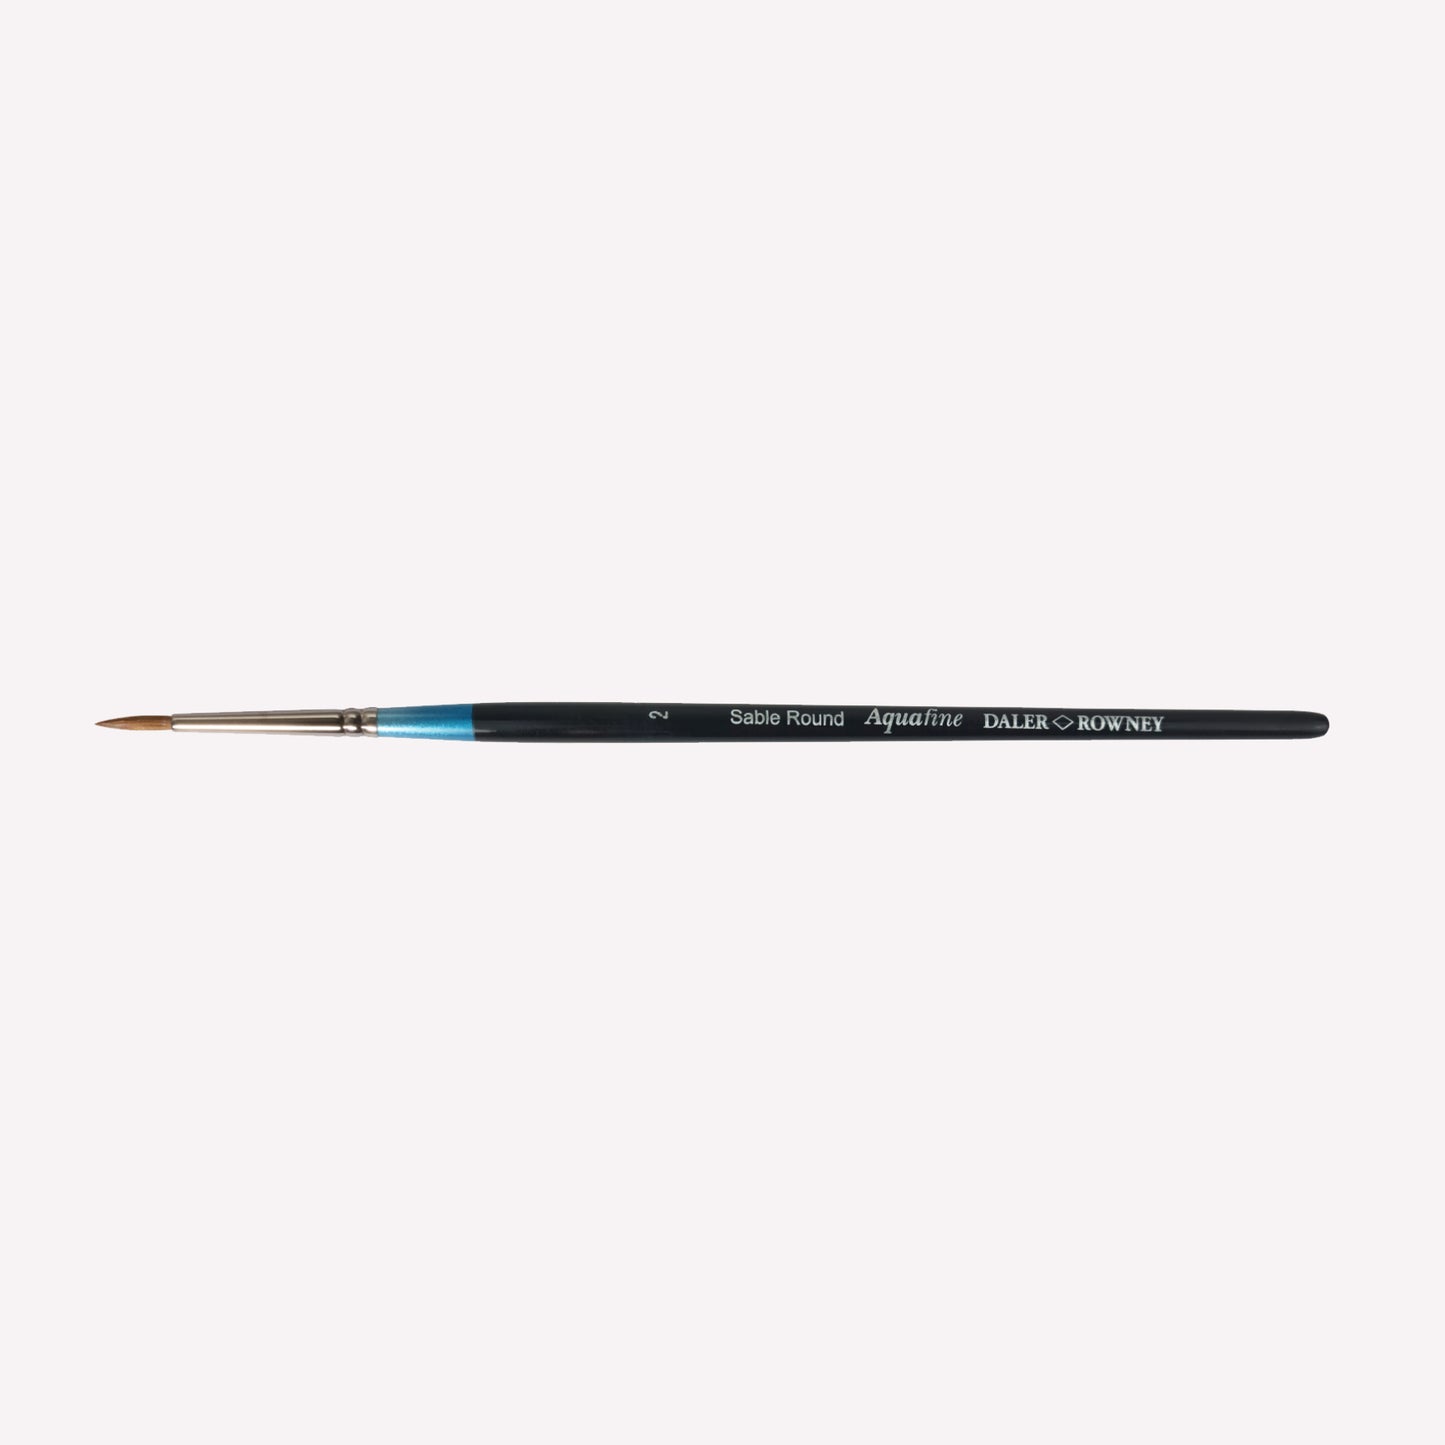 Daler Rowney Aquafine Sable round paintbrush in size 2. The natural filaments come to a fine point, perfect for detailed paintings. Brushes have a classy black handle with blue detailing and a silver ferrule. 